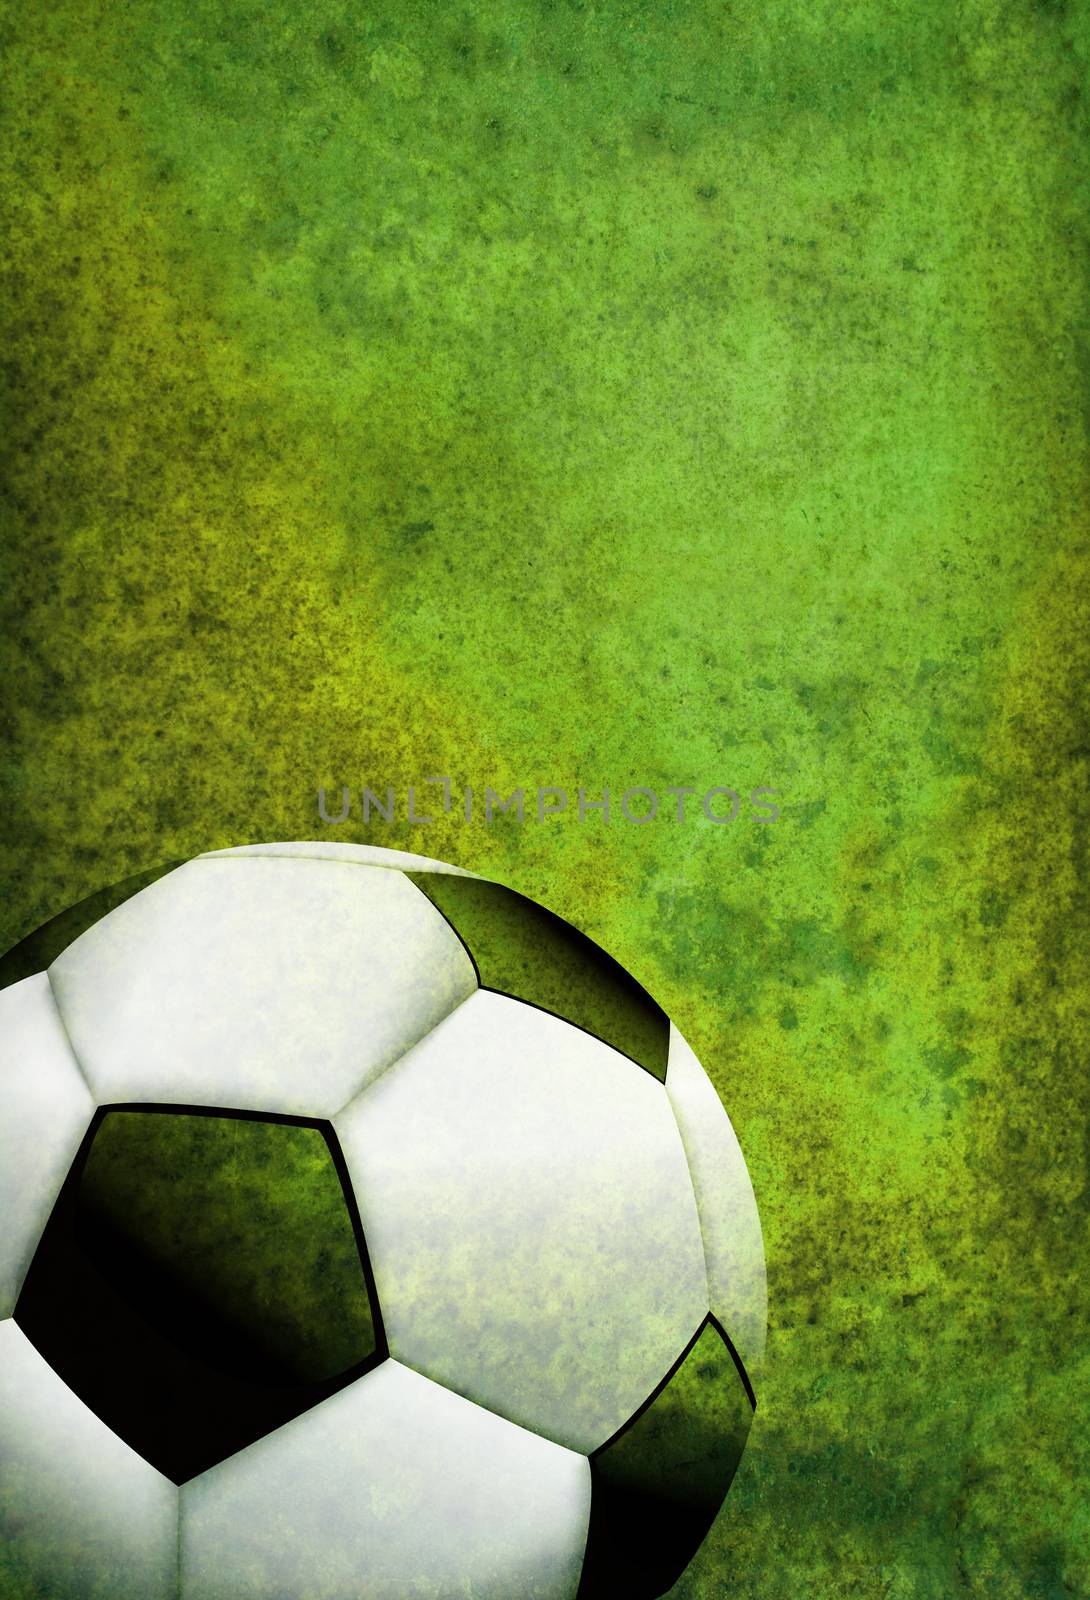 Textured Soccer Football Field Background with Ball by enterlinedesign